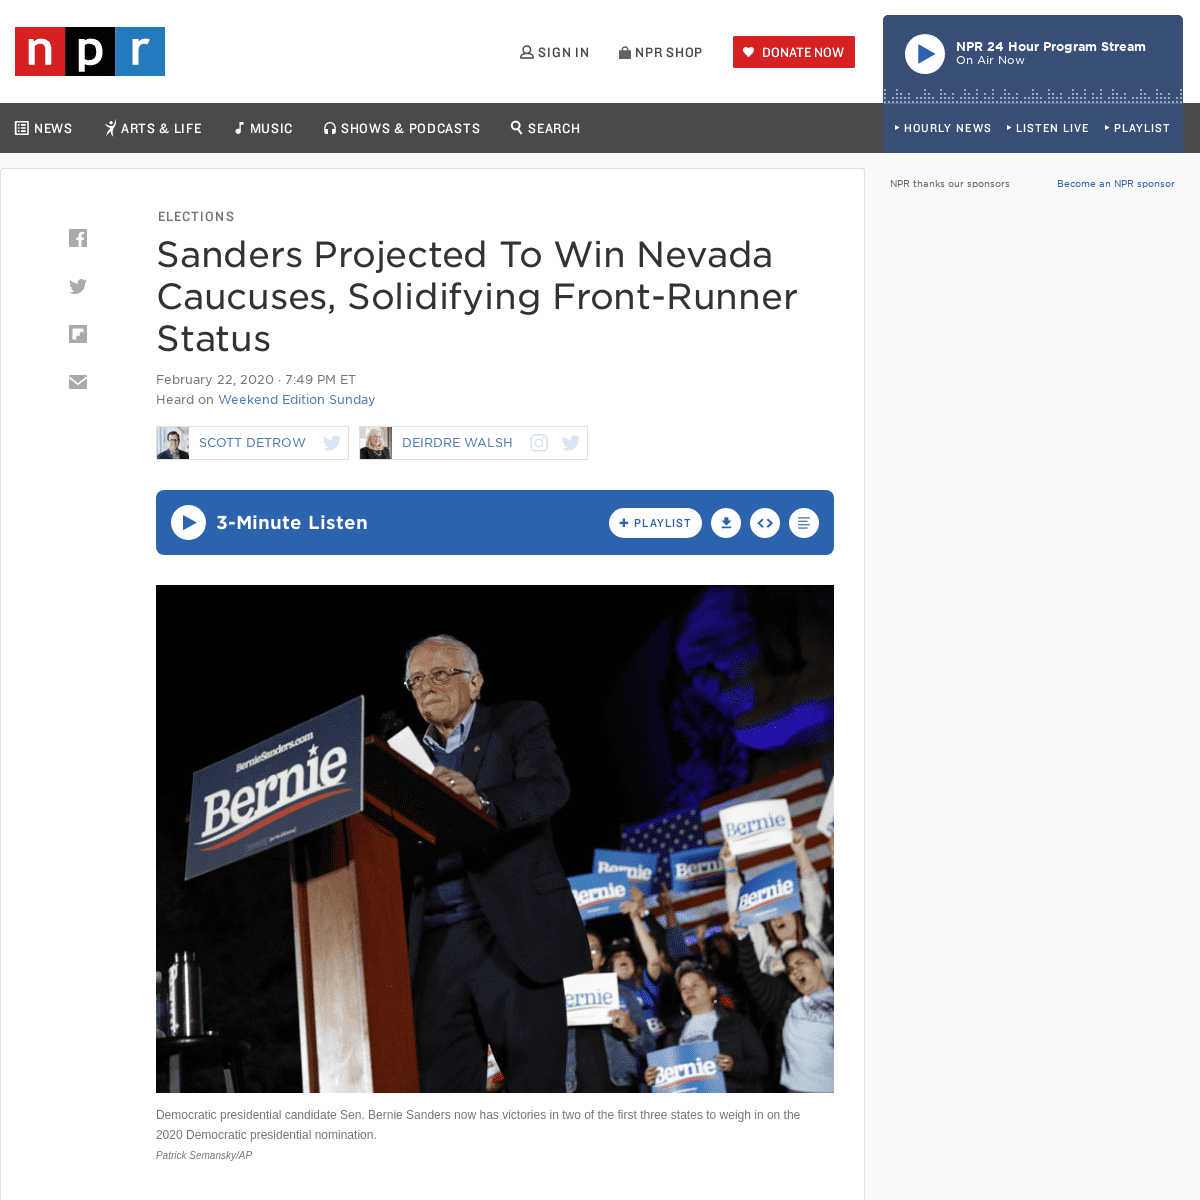 A complete backup of www.npr.org/2020/02/22/808503311/sanders-projected-to-win-nevada-caucuses-solidifing-status-as-front-runner